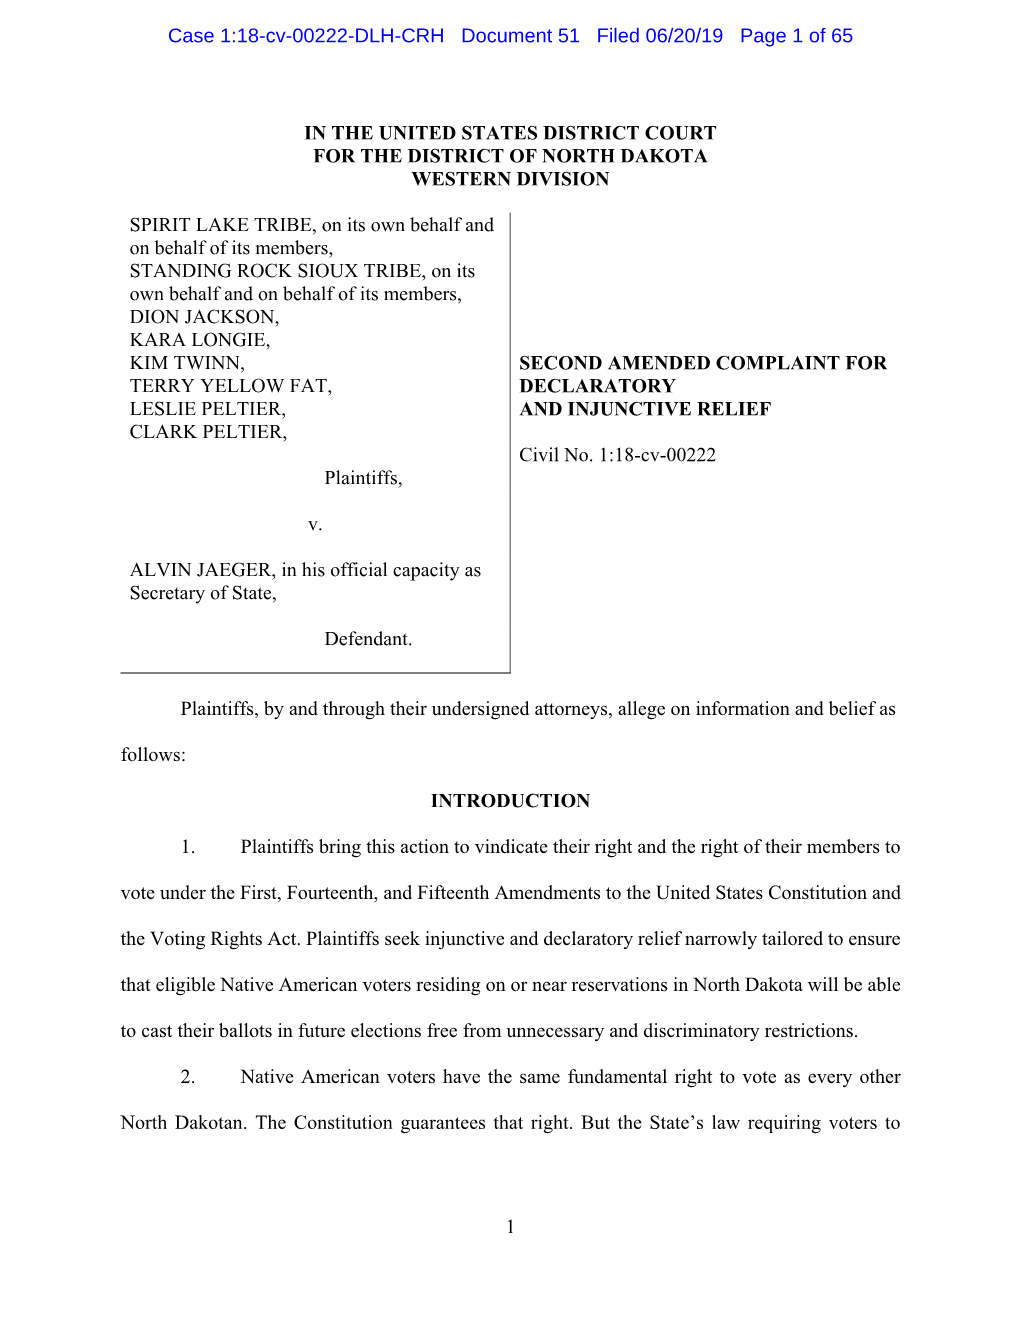 Case 1:18-Cv-00222-DLH-CRH Document 51 Filed 06/20/19 Page 1 of 65